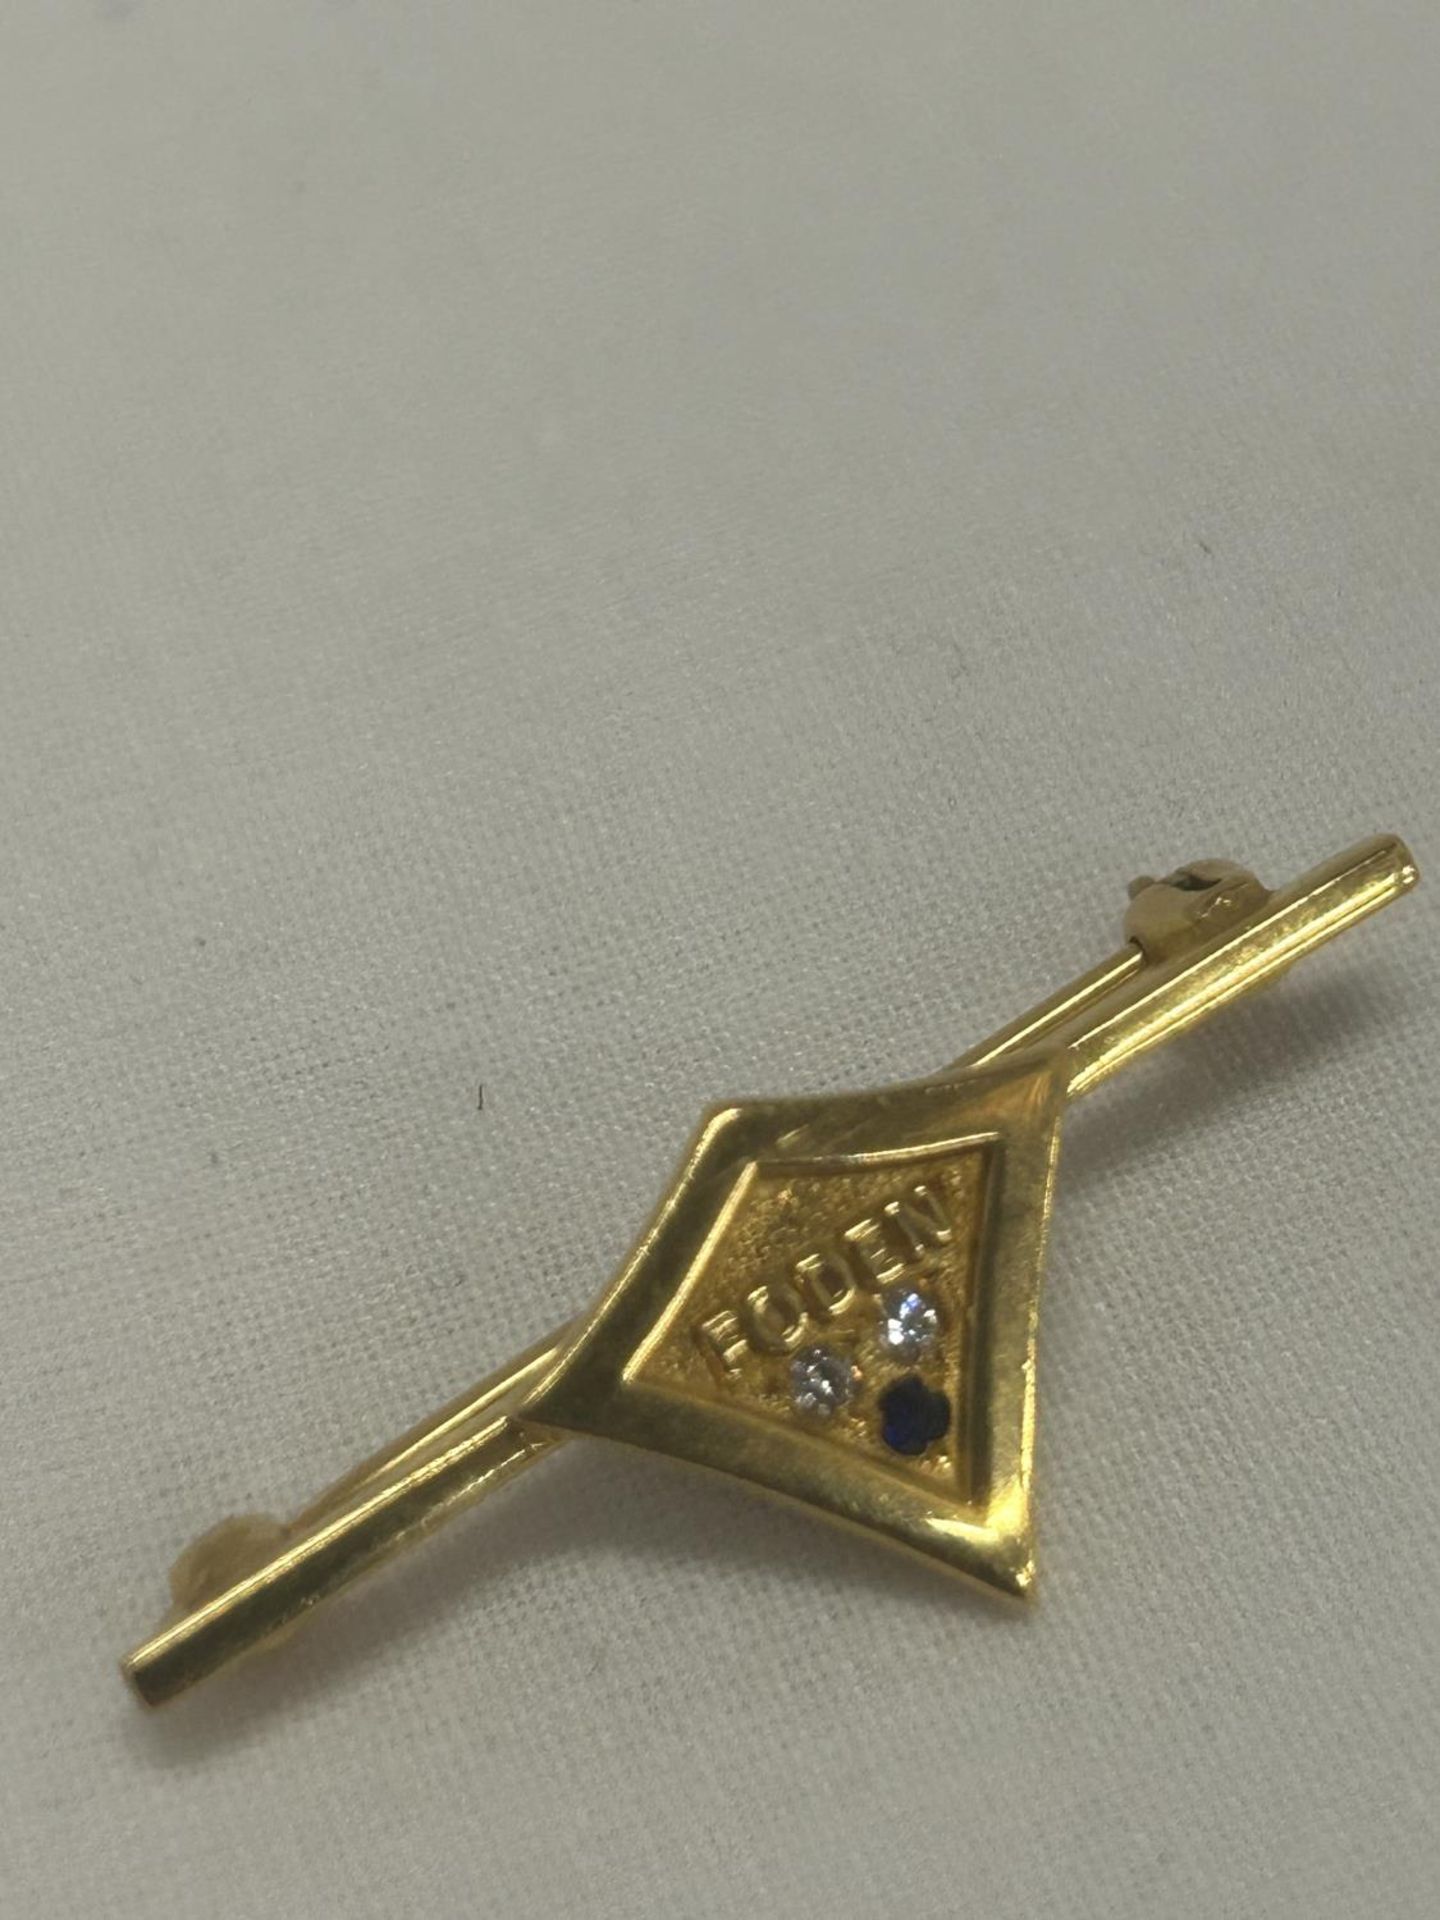 A HALLMARKED 9CT GOLD DIAMOND AND SAPPHIRE 'FODEN' BADGE WEIGHT 3.37G - Image 4 of 4